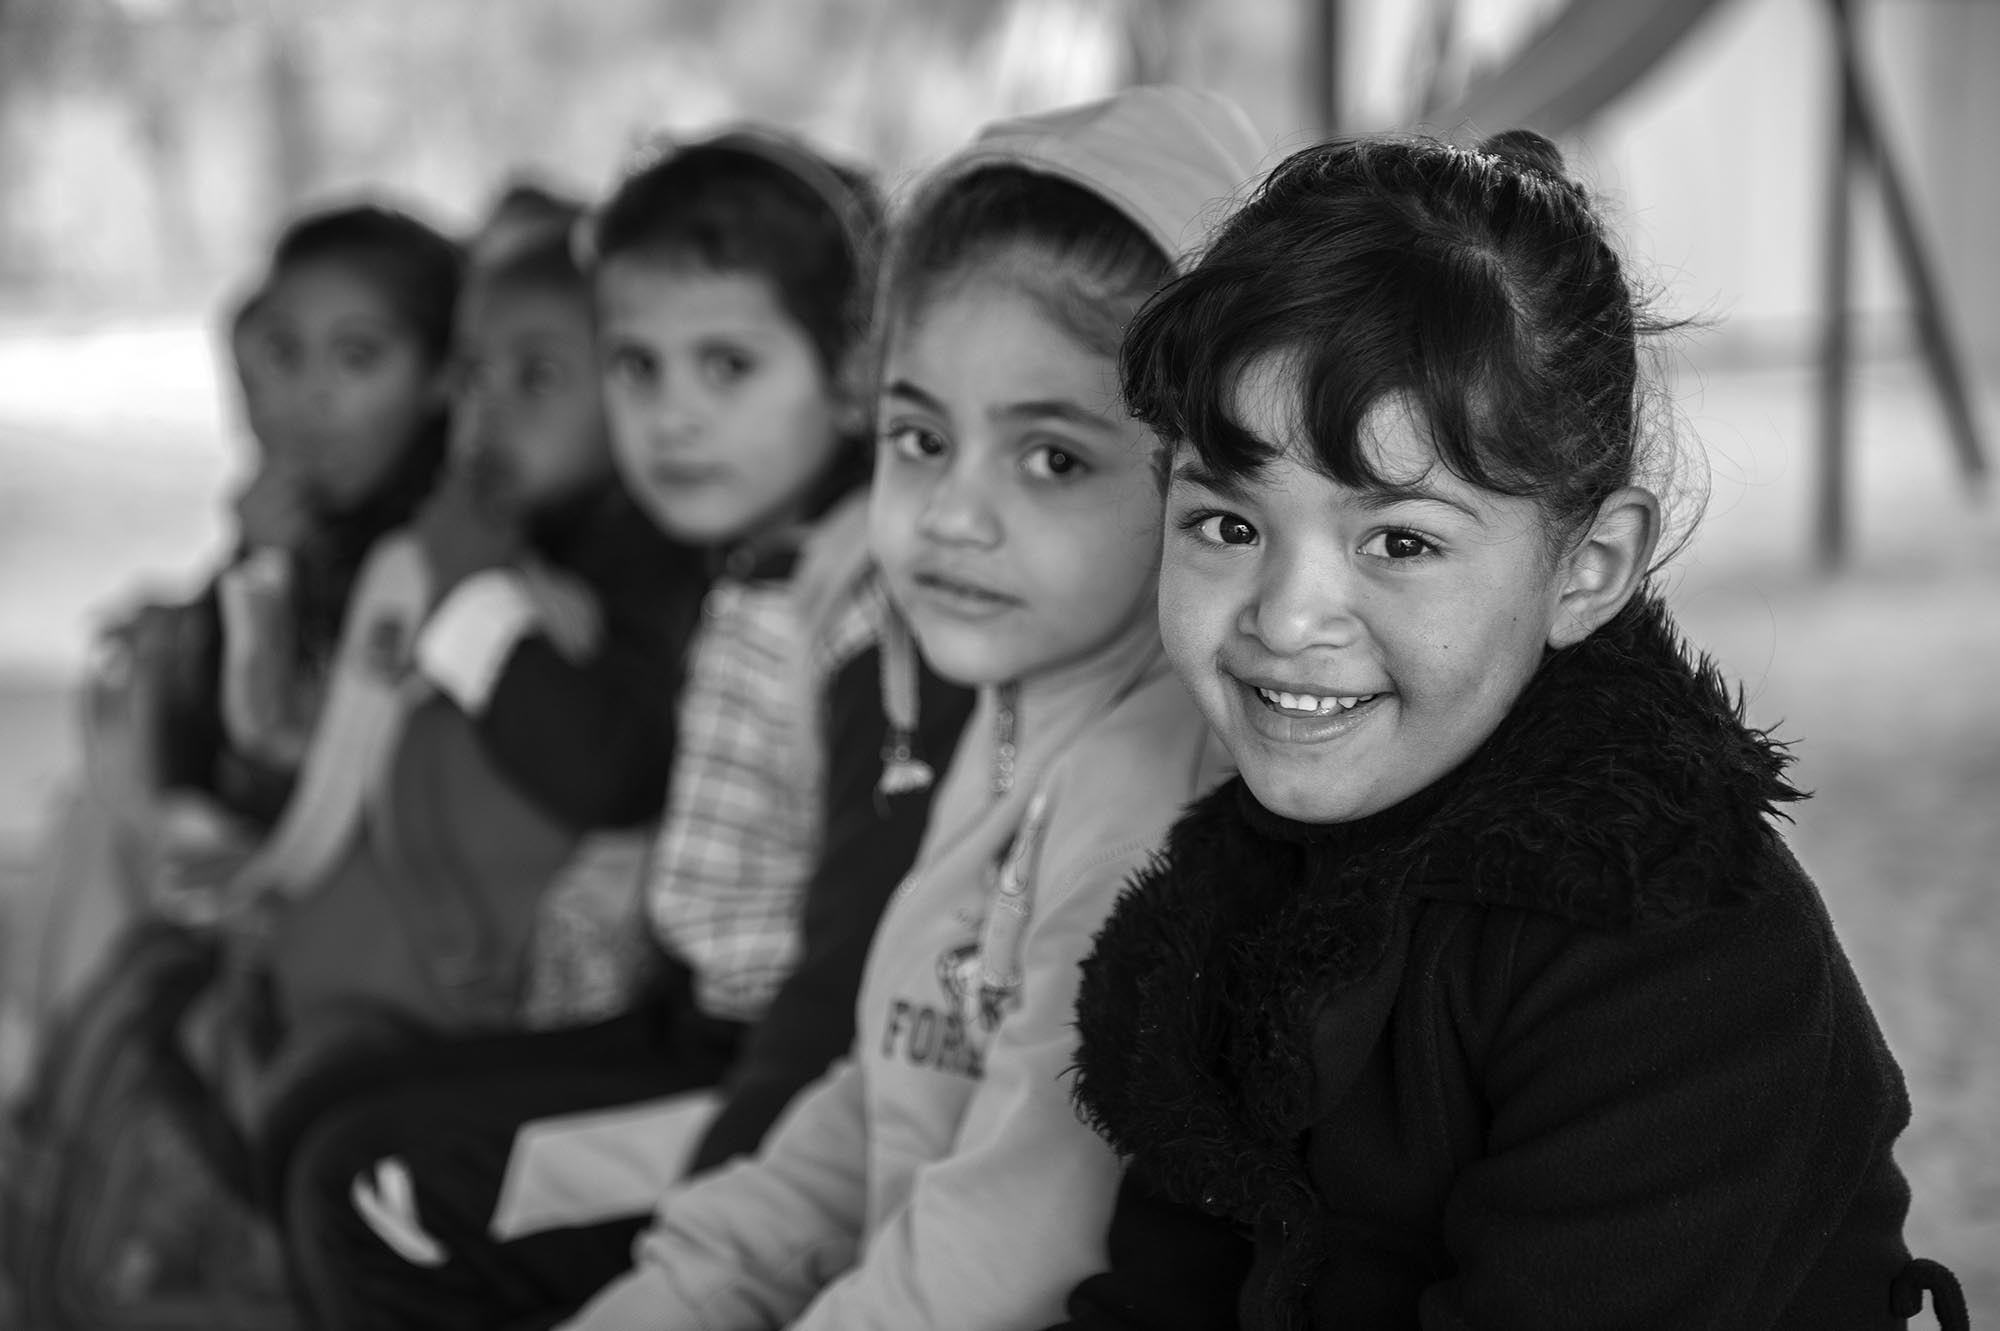 The children are happy at their newly renovated preschool in Ouja, Jericho.